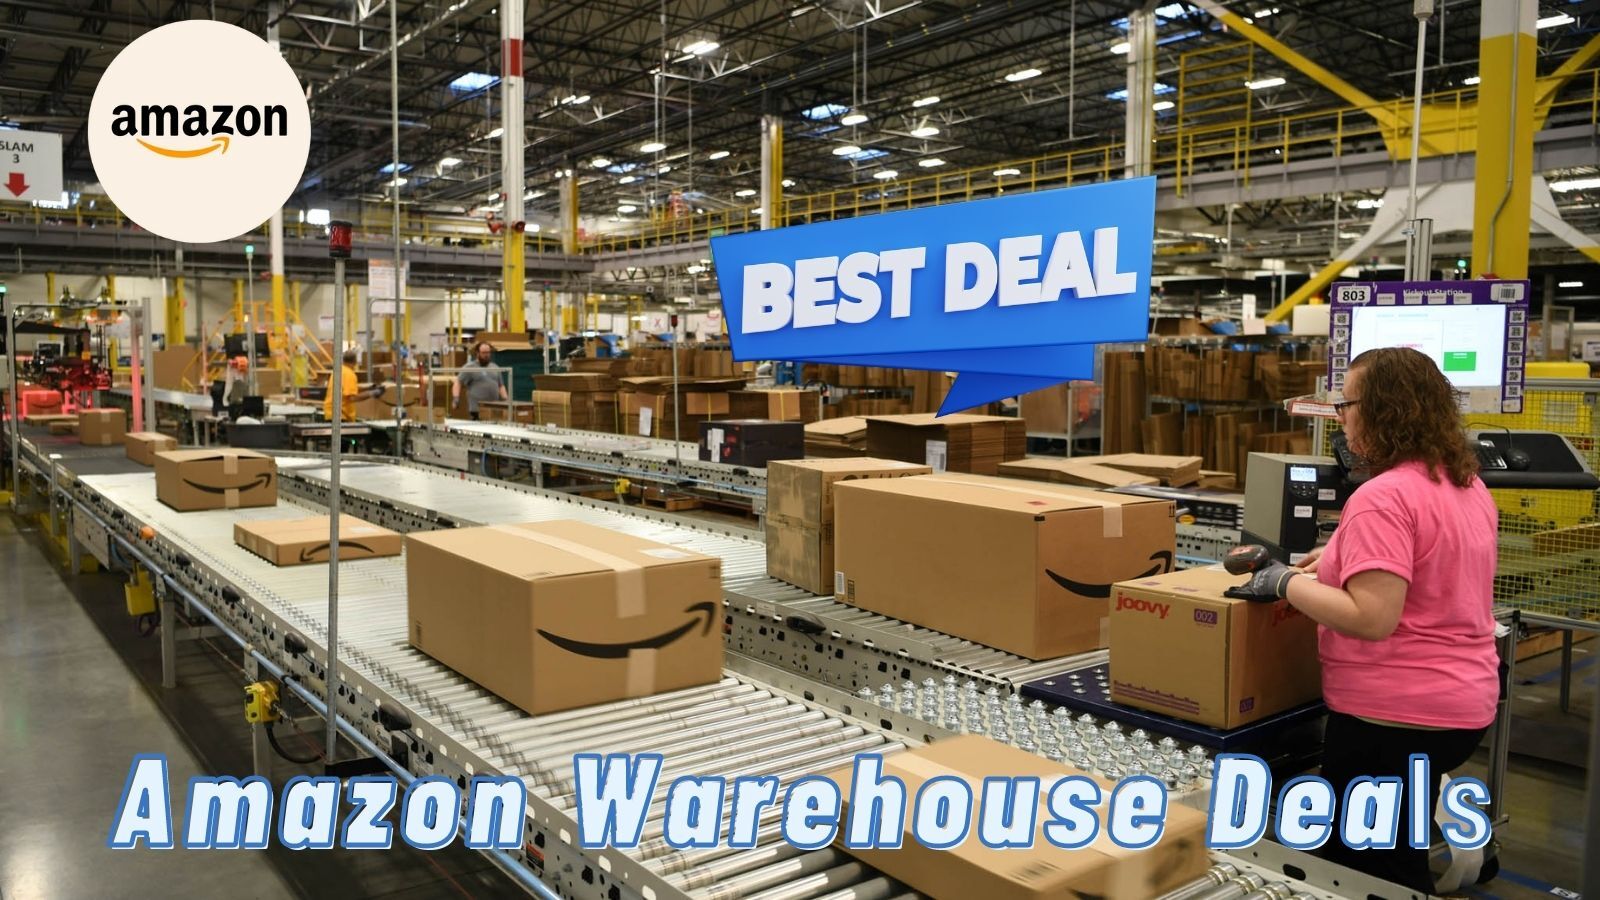 Amazon Warehouse Deals (All You Need to Know!)